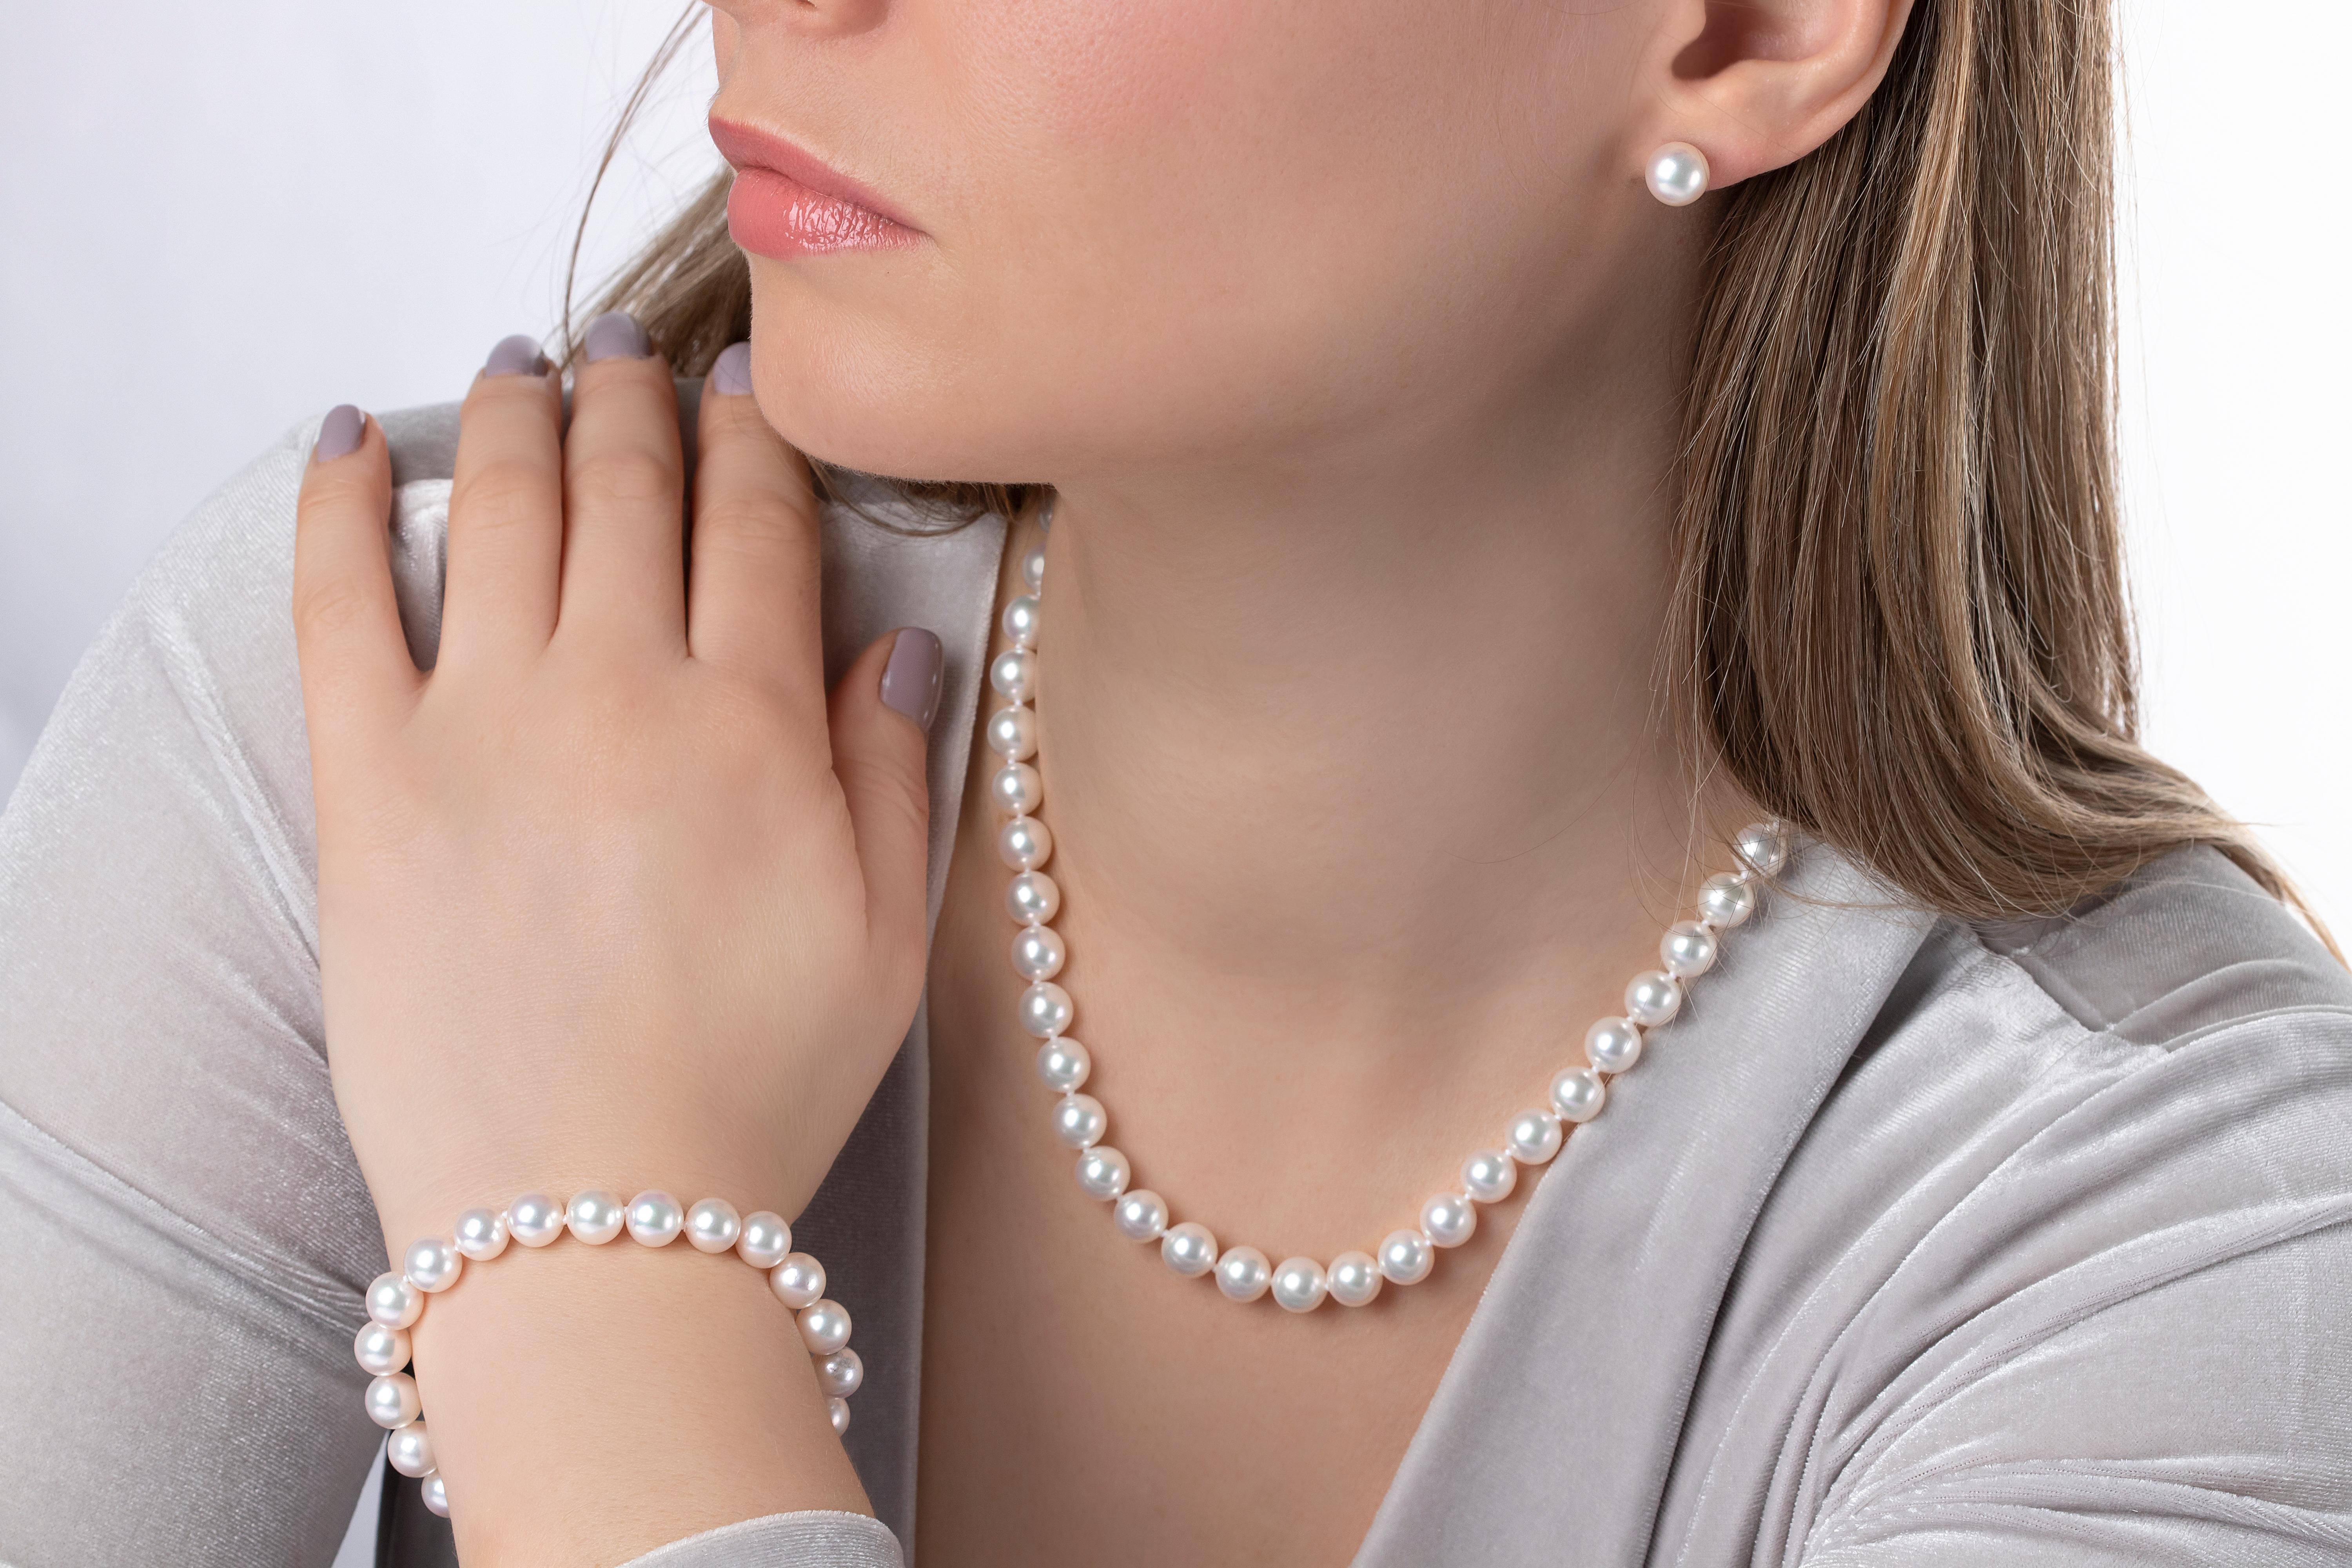 This timeless necklace by Yoko London is an essential item for any jewellery collection. The necklace is crafted from our highest AA Quality Japanese Akoya pearls which have been matched by experts and strung by hand in our London atelier. Perfect